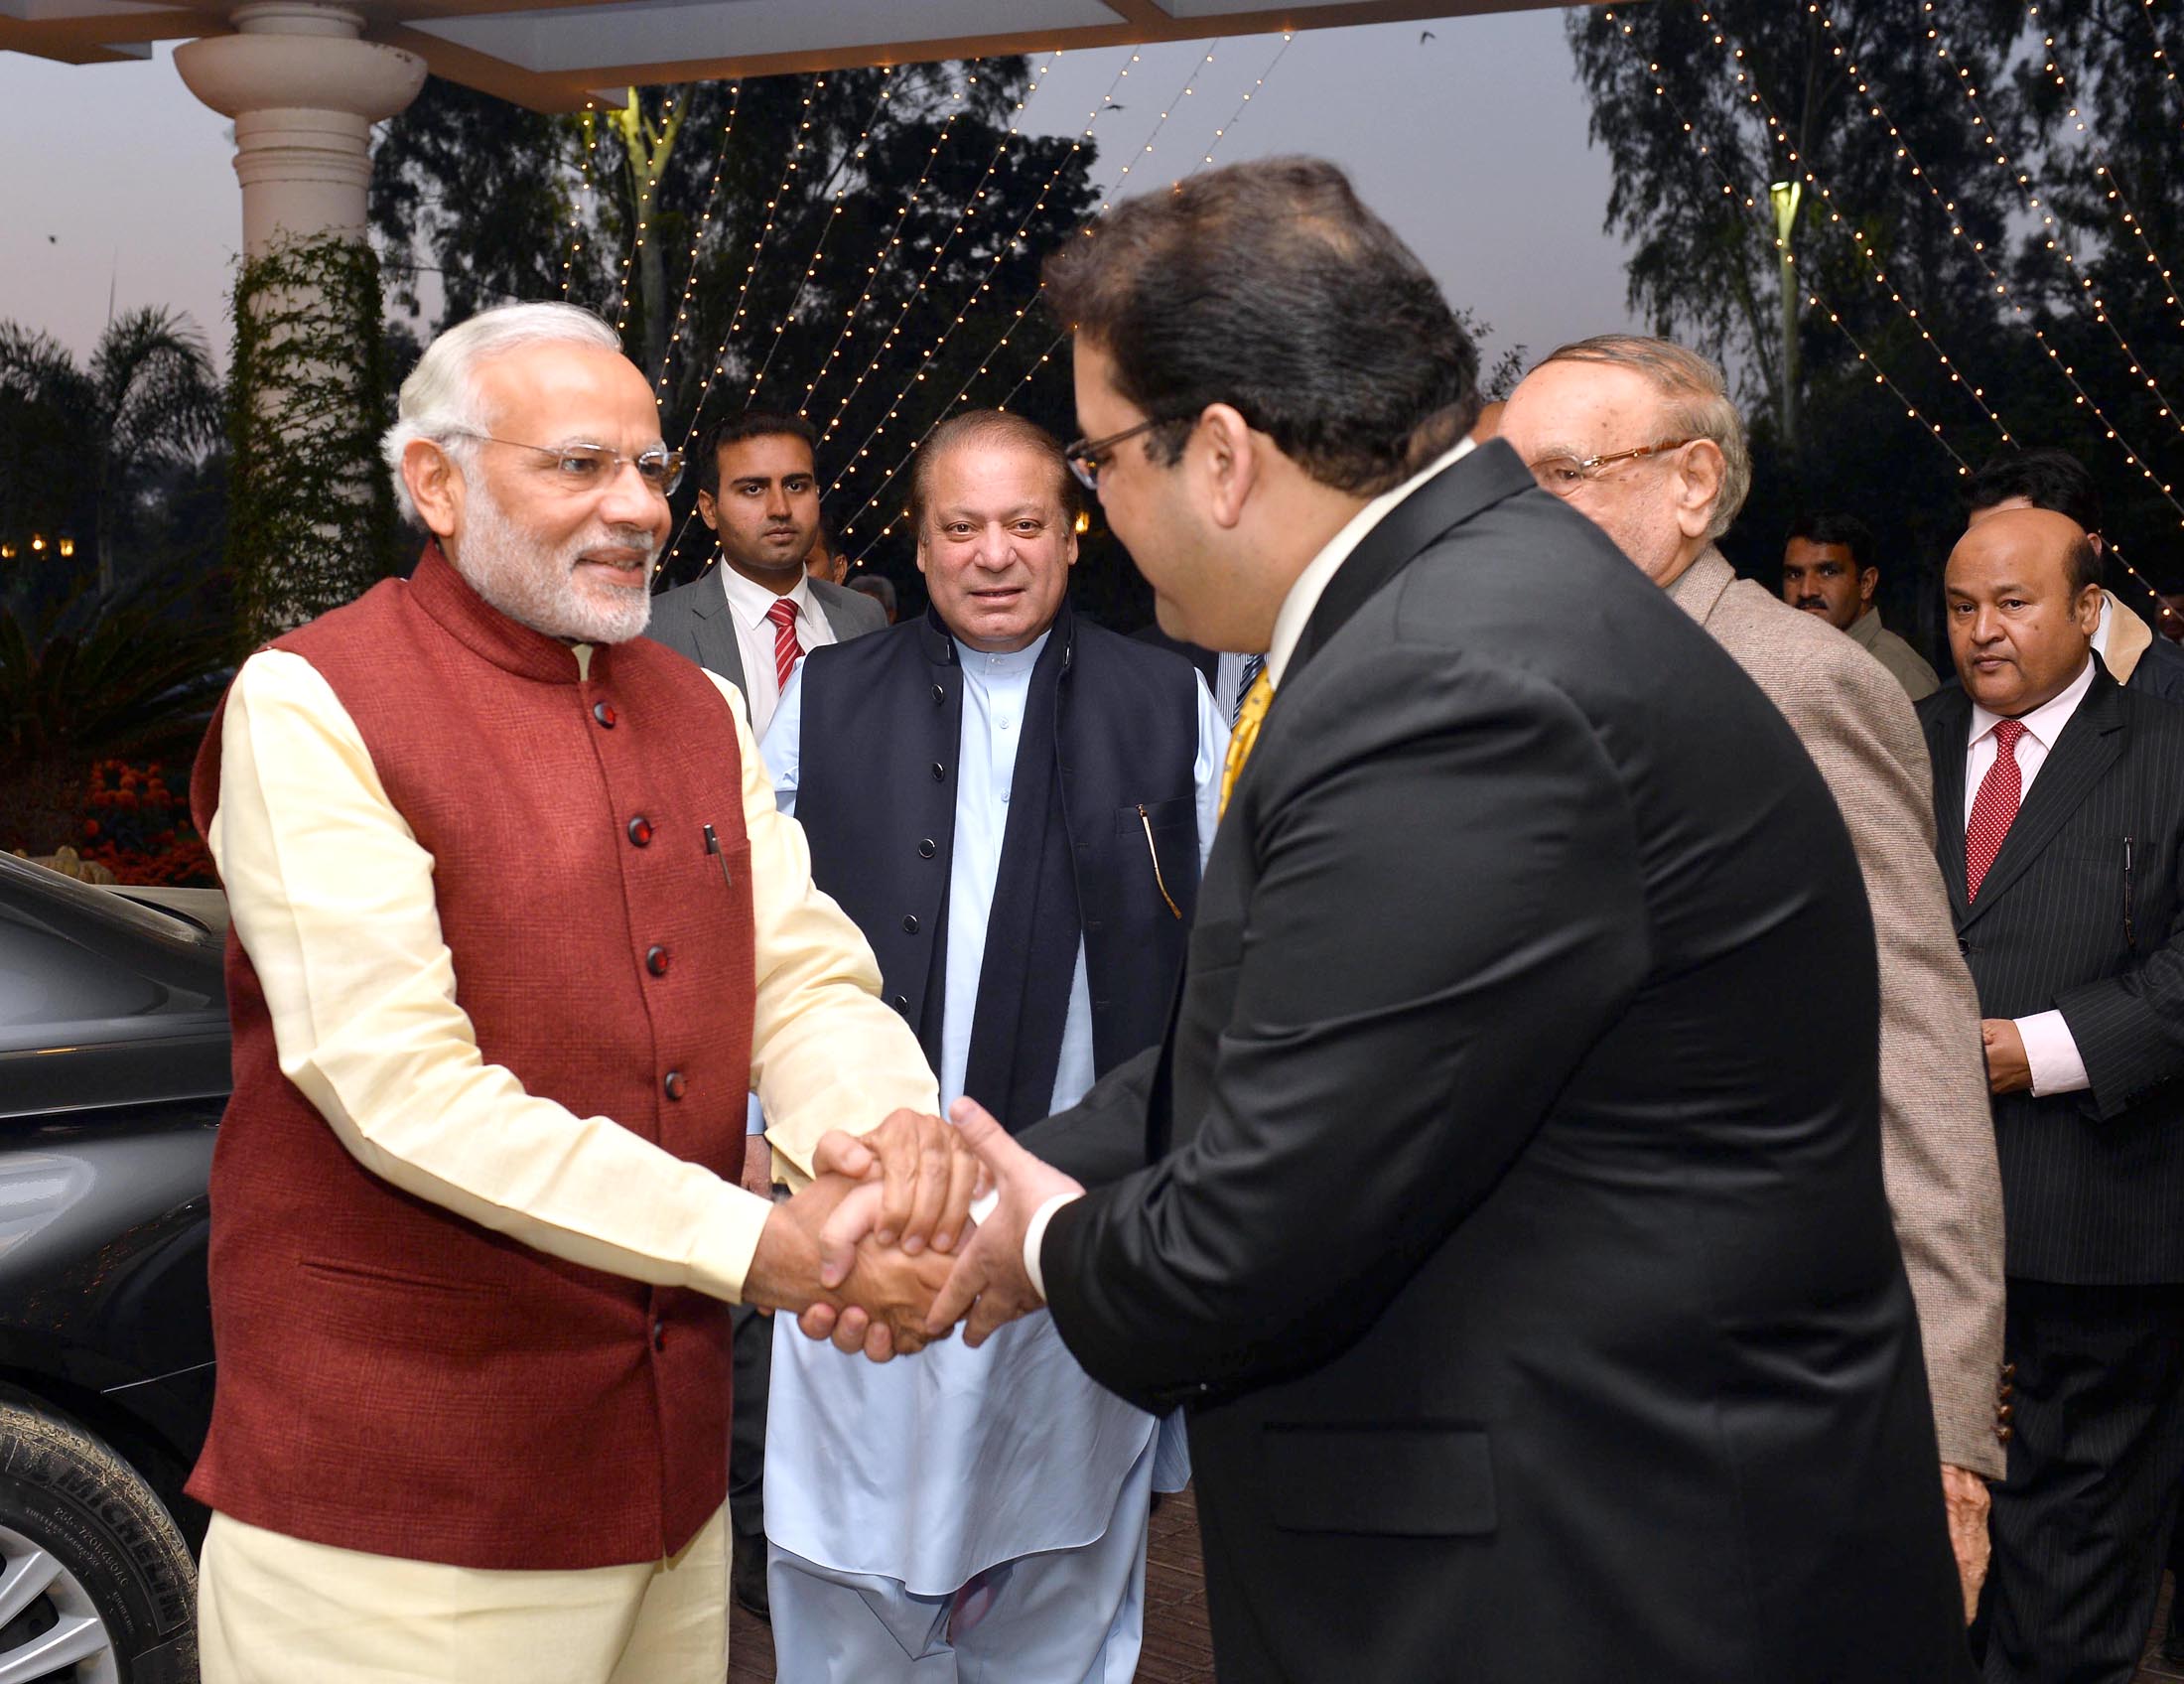 The_Prime_Minister%2C_Shri_Narendra_Modi_visits_the_Prime_Minister_of_Pakistan%2C_Mr._Nawaz_Sharif%27s_home_in_Raiwind%2C_where_his_grand-daughter%27s_wedding_is_being_held%2C_in_Pakistan_on_December_25%2C_2015.jpg